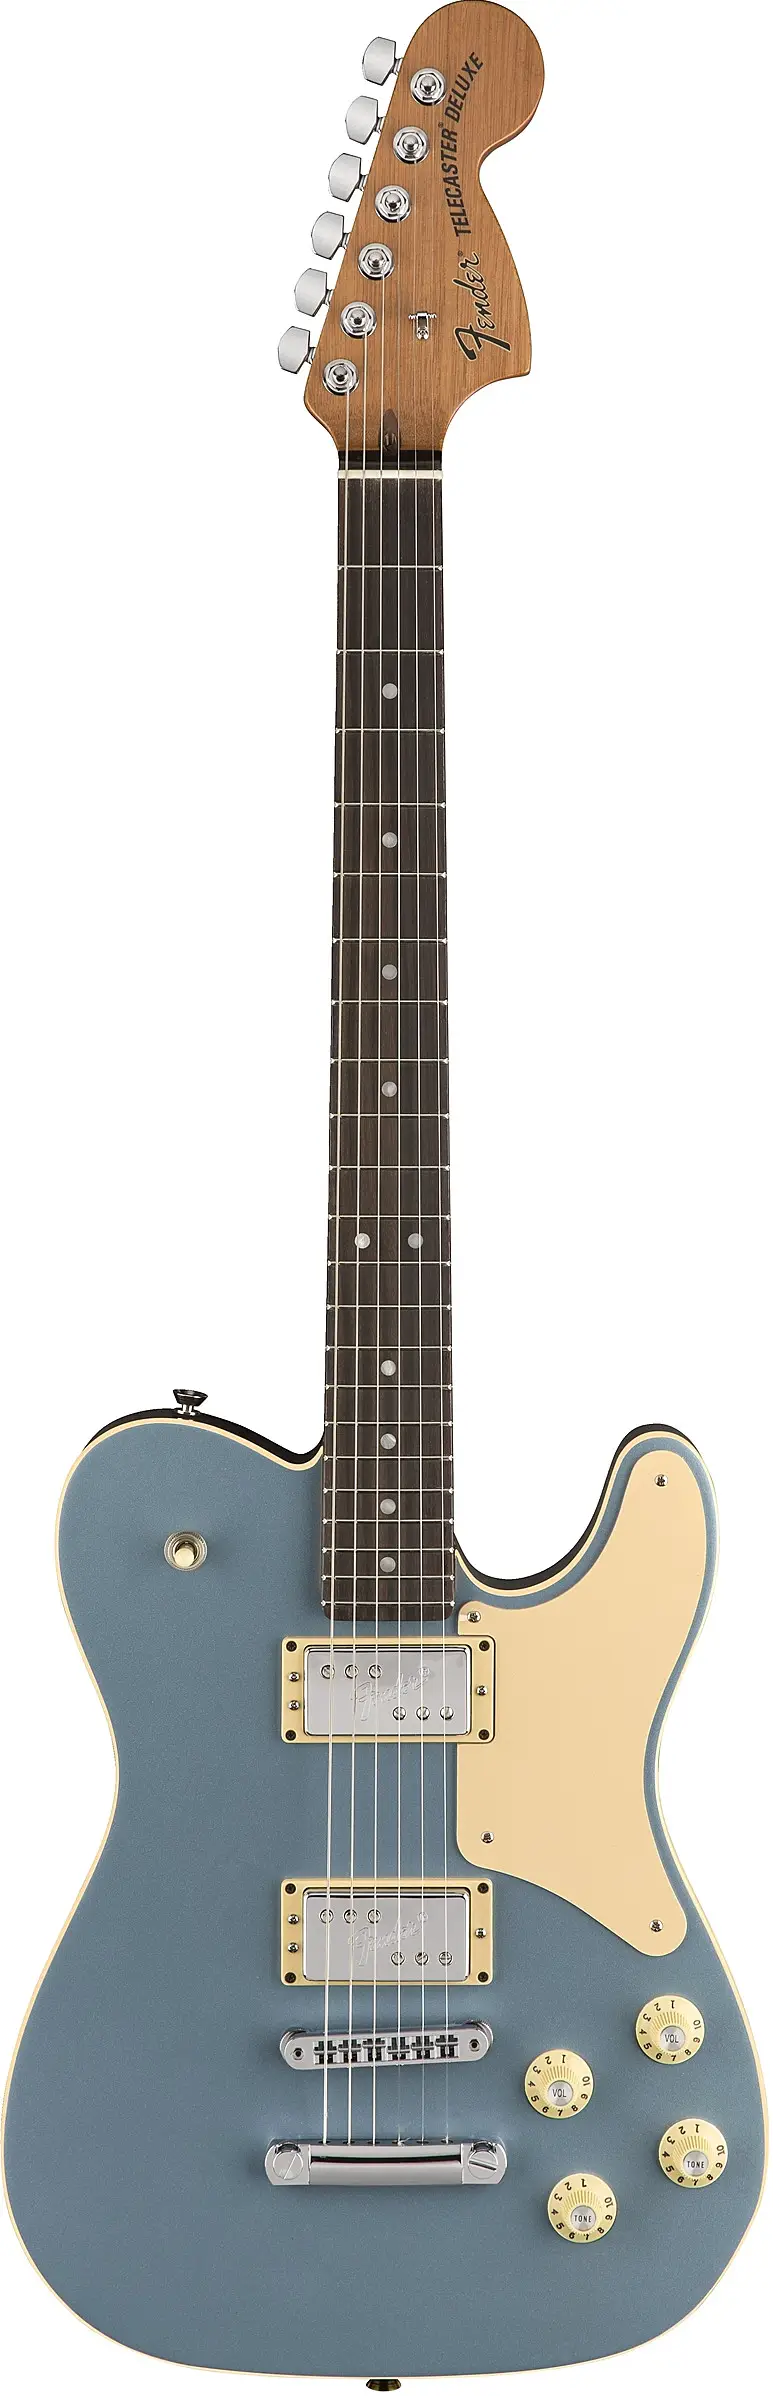 Limited Edition Troublemaker Tele by Fender